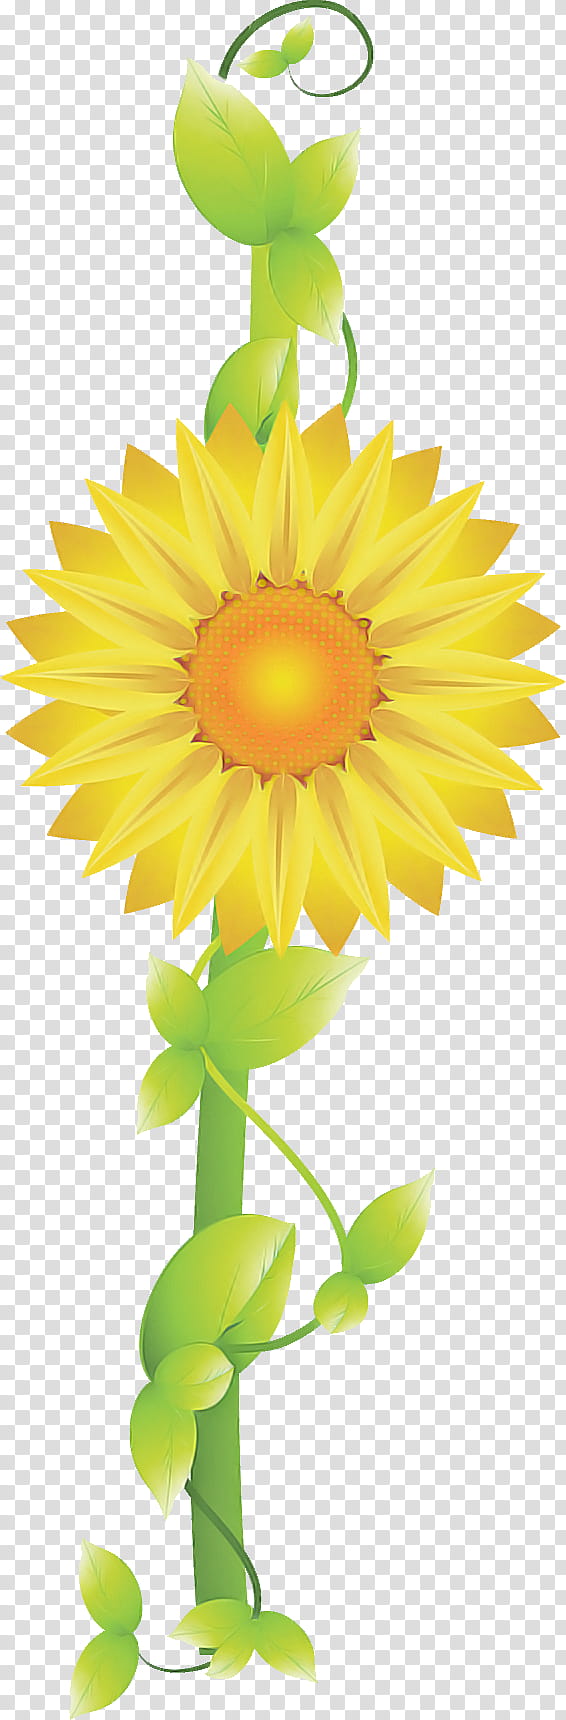 flower border flower background floral line, Sunflower, Yellow, Plant, Petal, English Marigold, Cut Flowers, Daisy Family transparent background PNG clipart